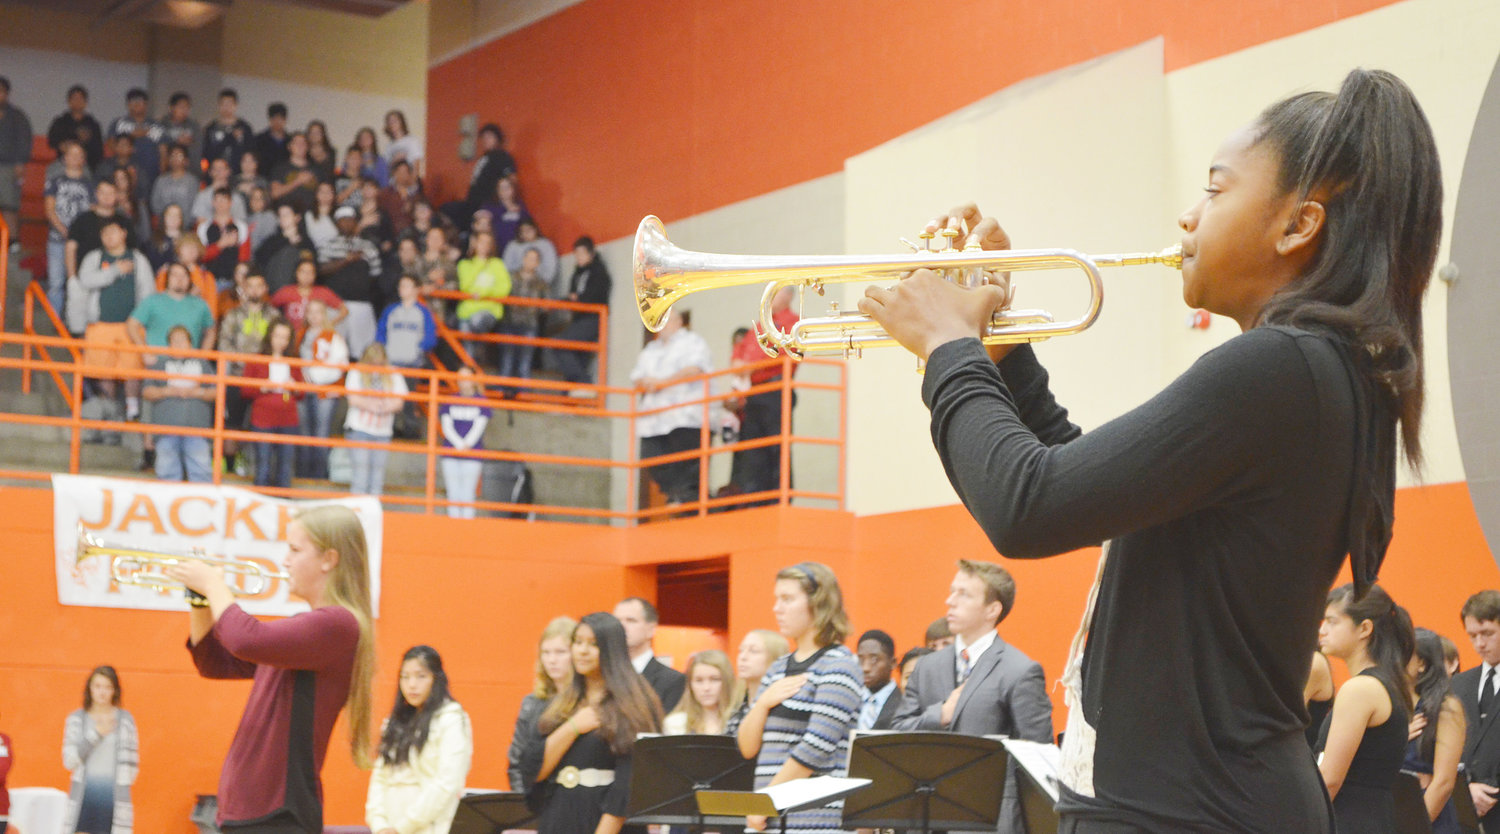 “Taps” is played at the conclusion of the Mineola Veterans Day program held in the high school gym. (Monitor photo by Evan Dudley)